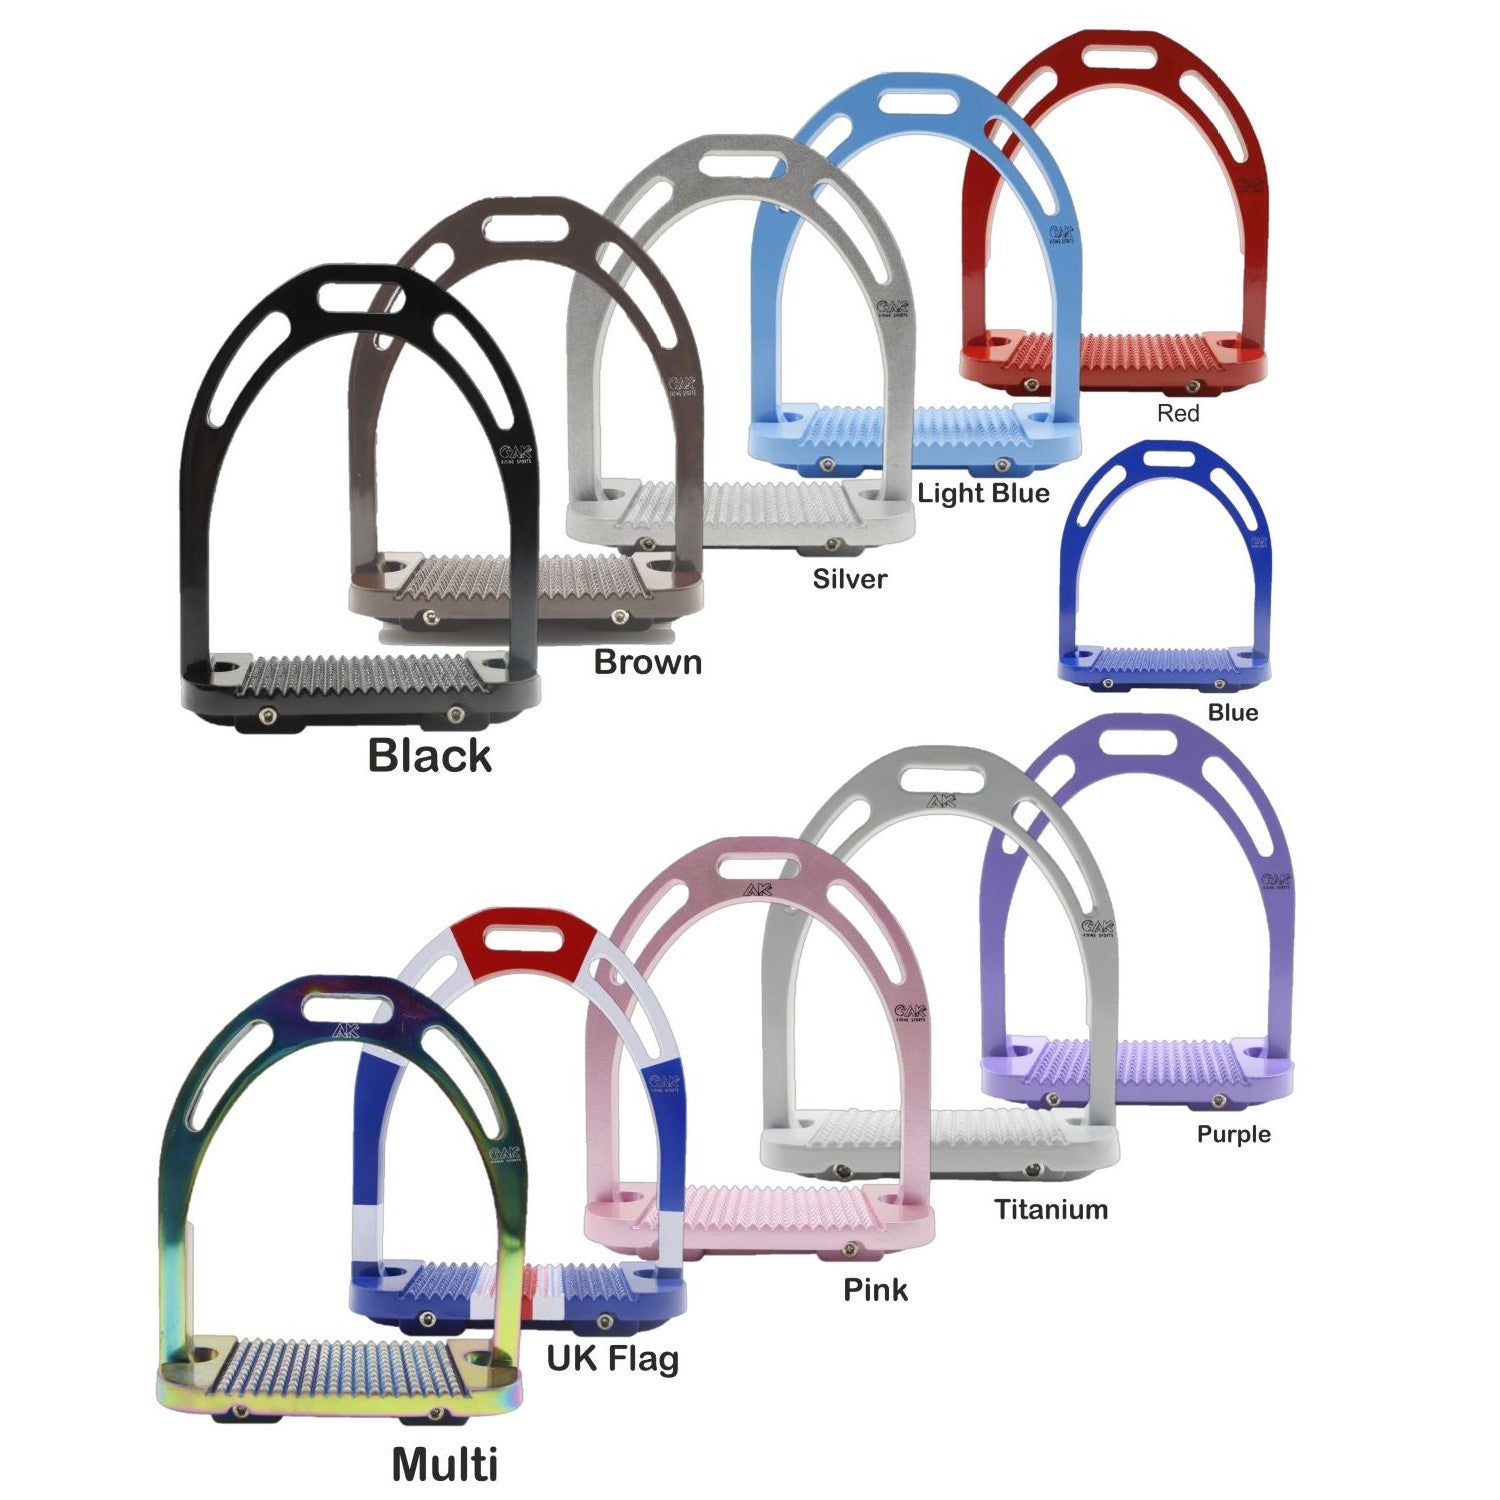 AK Aluminum Light Weight Stirrups with Coated Colors